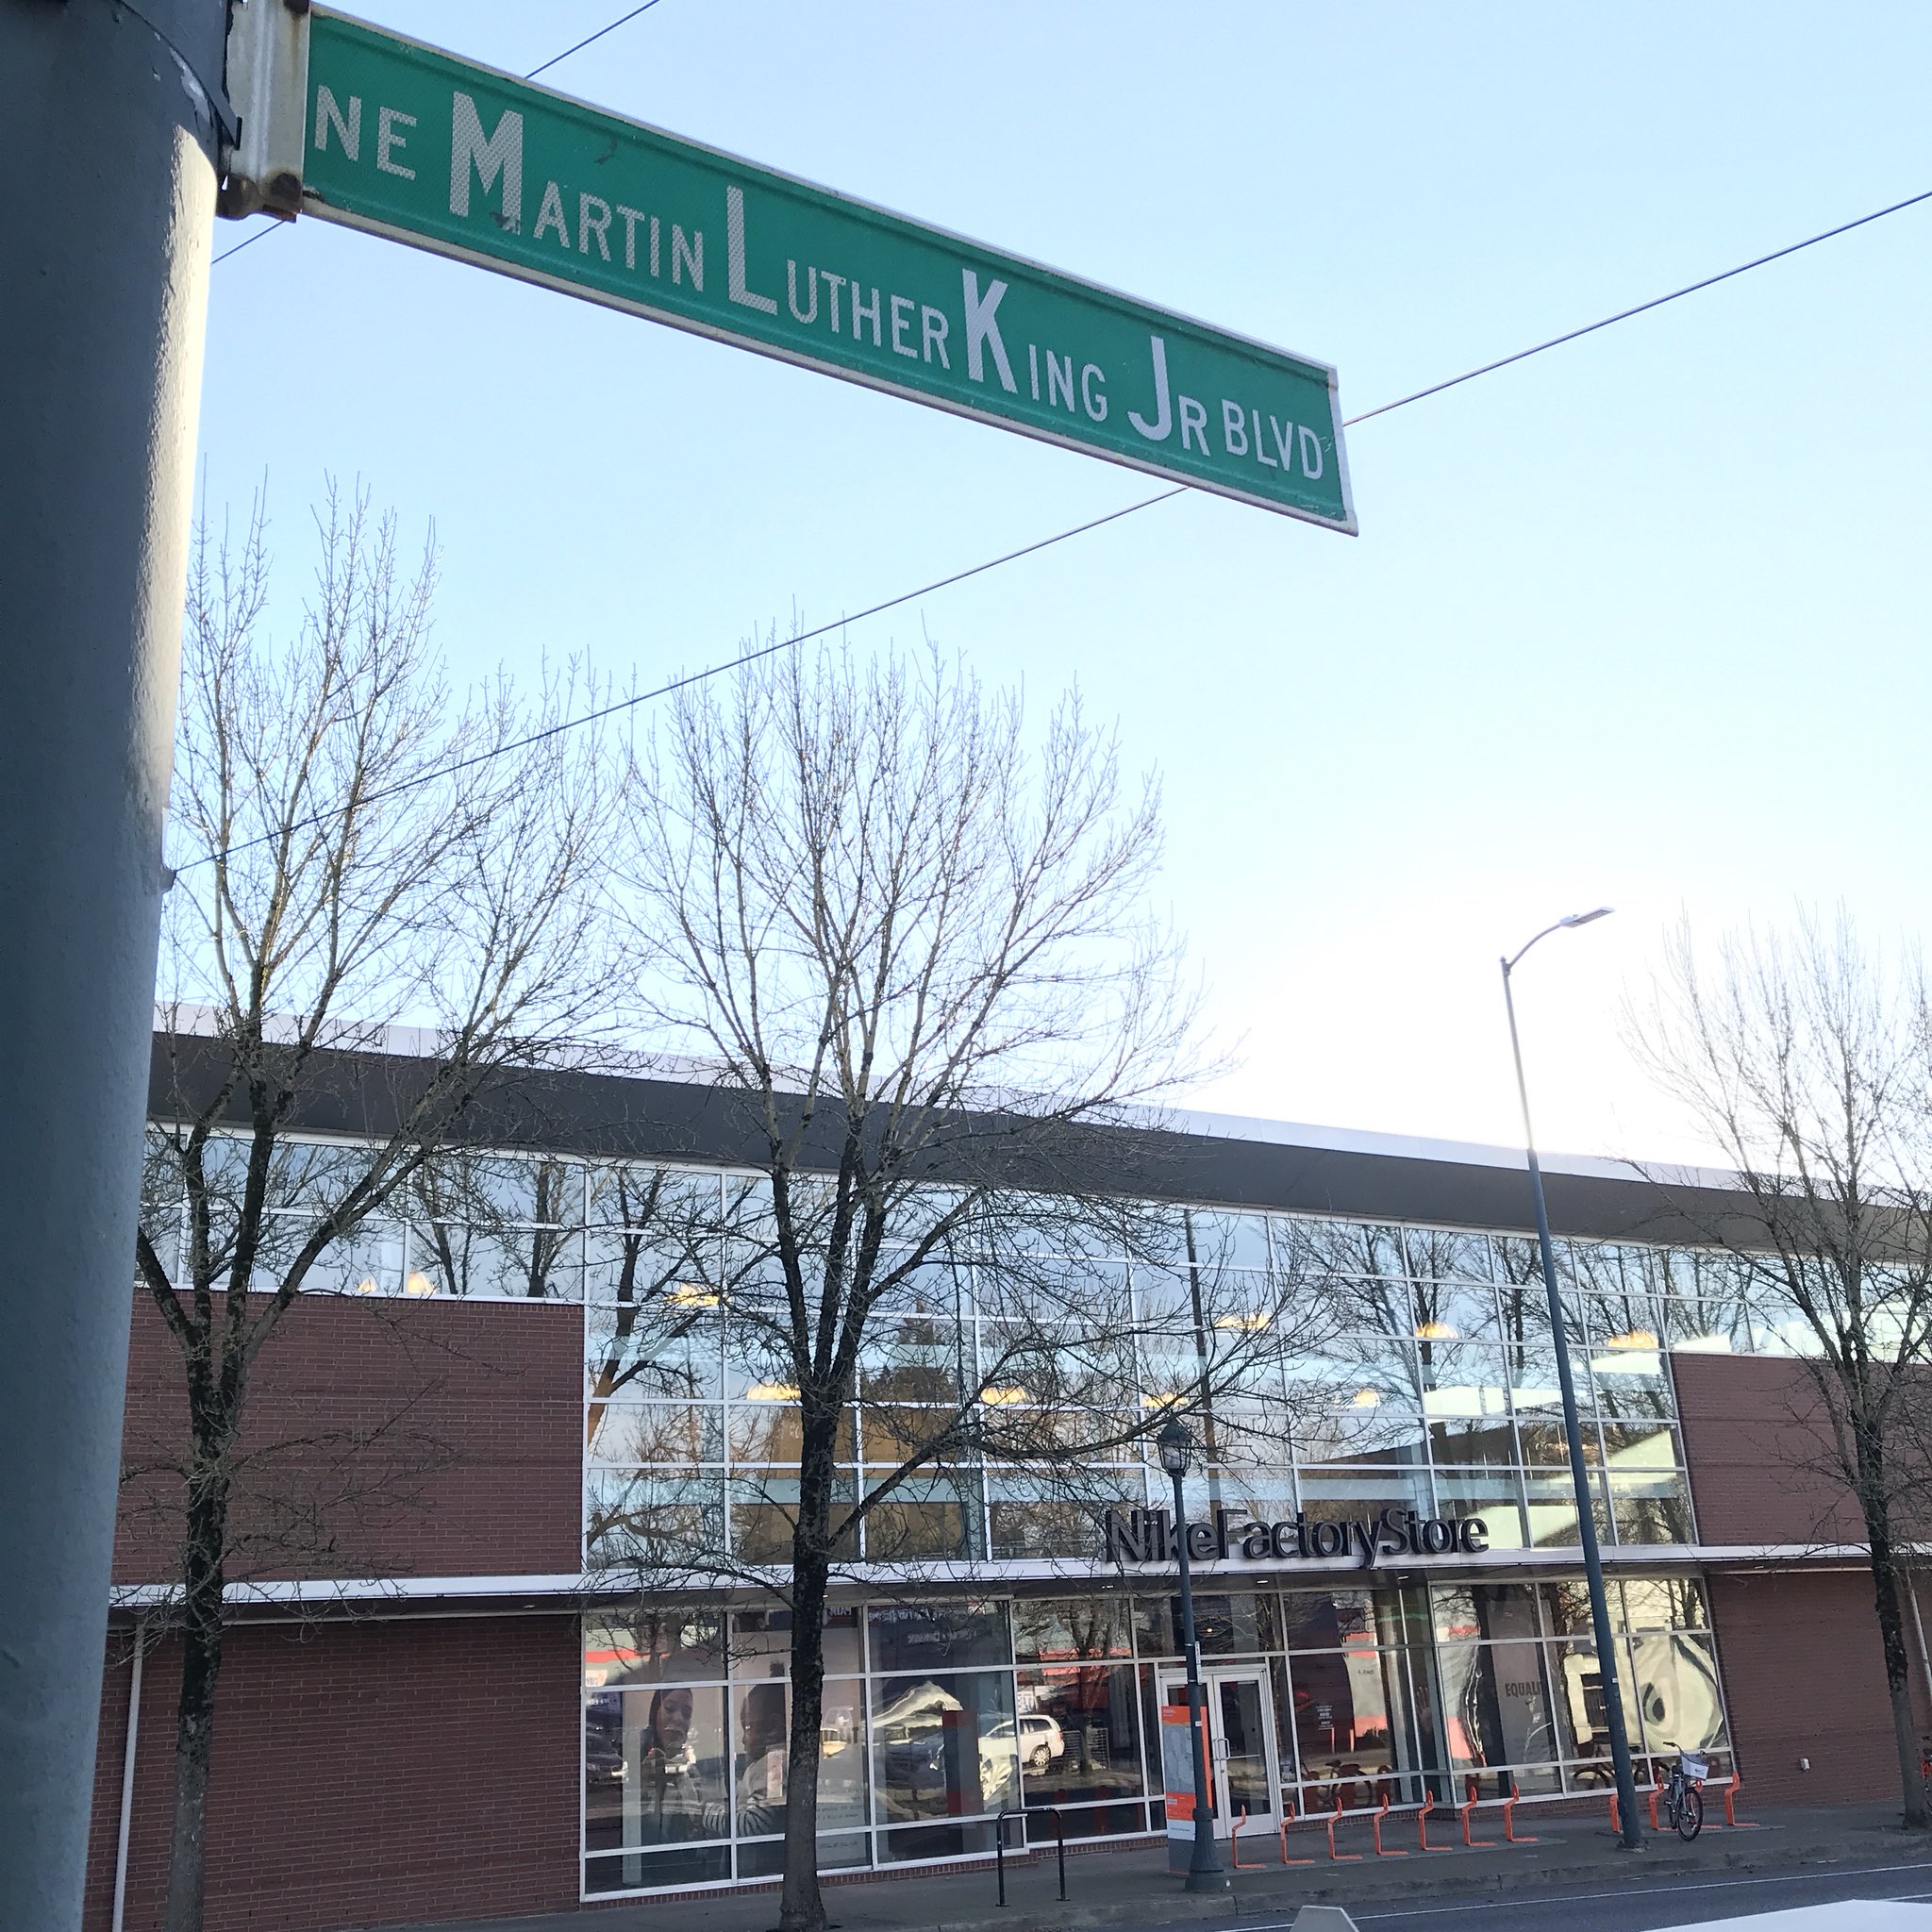 shoezeum on Twitter: "The Nike Factory Store Martin Luther King Jr Blvd in Portland, Oregon was Nike's first retail outlet store. It was originally opened 1984. https://t.co/6h2csP28Xx" / Twitter